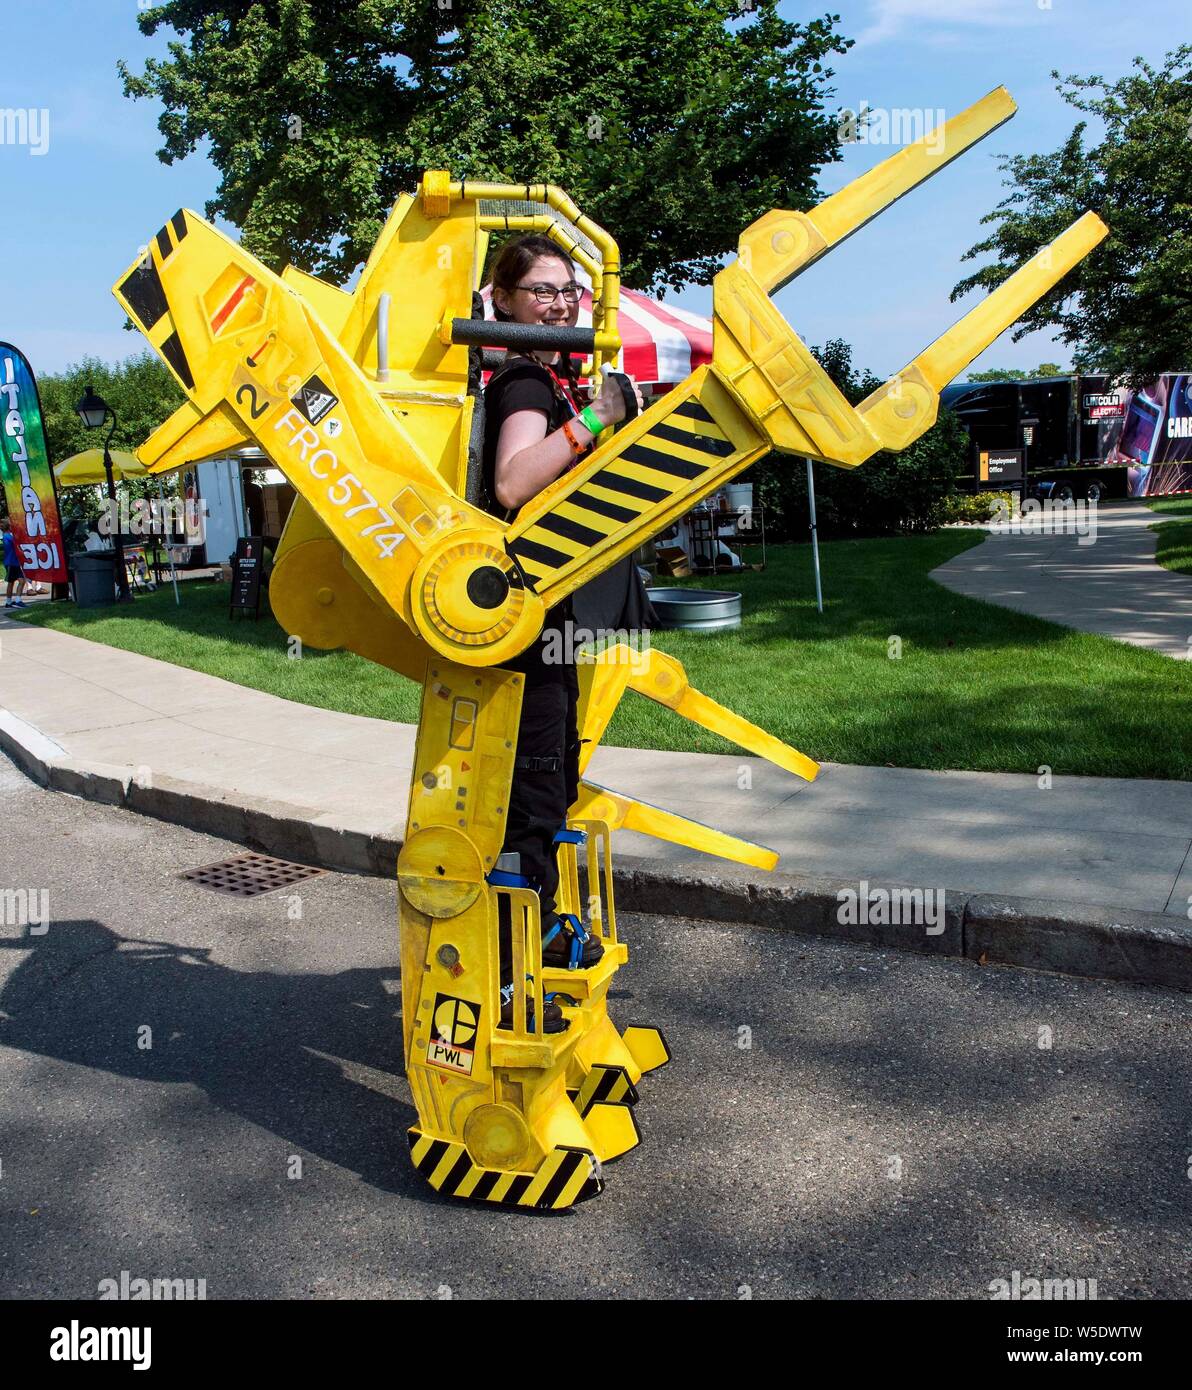 Dearborn, Michigan, USA. 28th July, 2019. A power loader from the film, 'Alien, ' walks the midway during the 10th Annual Maker Faire Detroit at the Henry Ford Museum of American Innovation. Maker Faire is a gathering of tech enthusiasts, tinkerers, engineers and science club members who gather to show and share knowledge about what they've made. Credit: Brian Cahn/ZUMA Wire/Alamy Live News Stock Photo